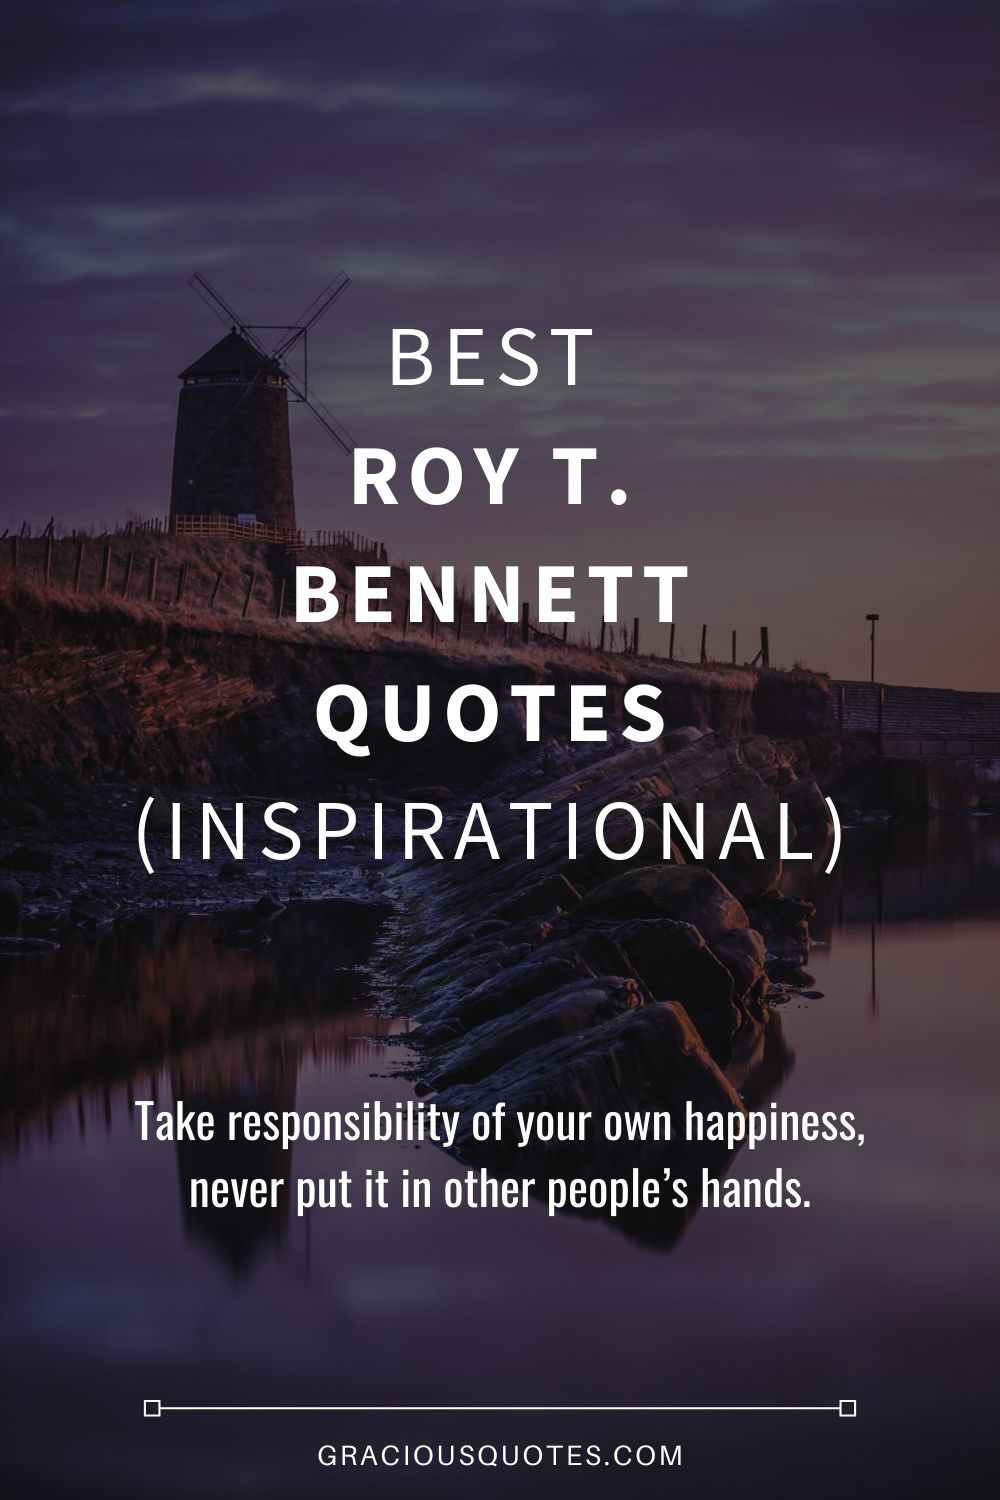 Best Roy T. Bennett Quotes (INSPIRATIONAL) - Gracious Quotes